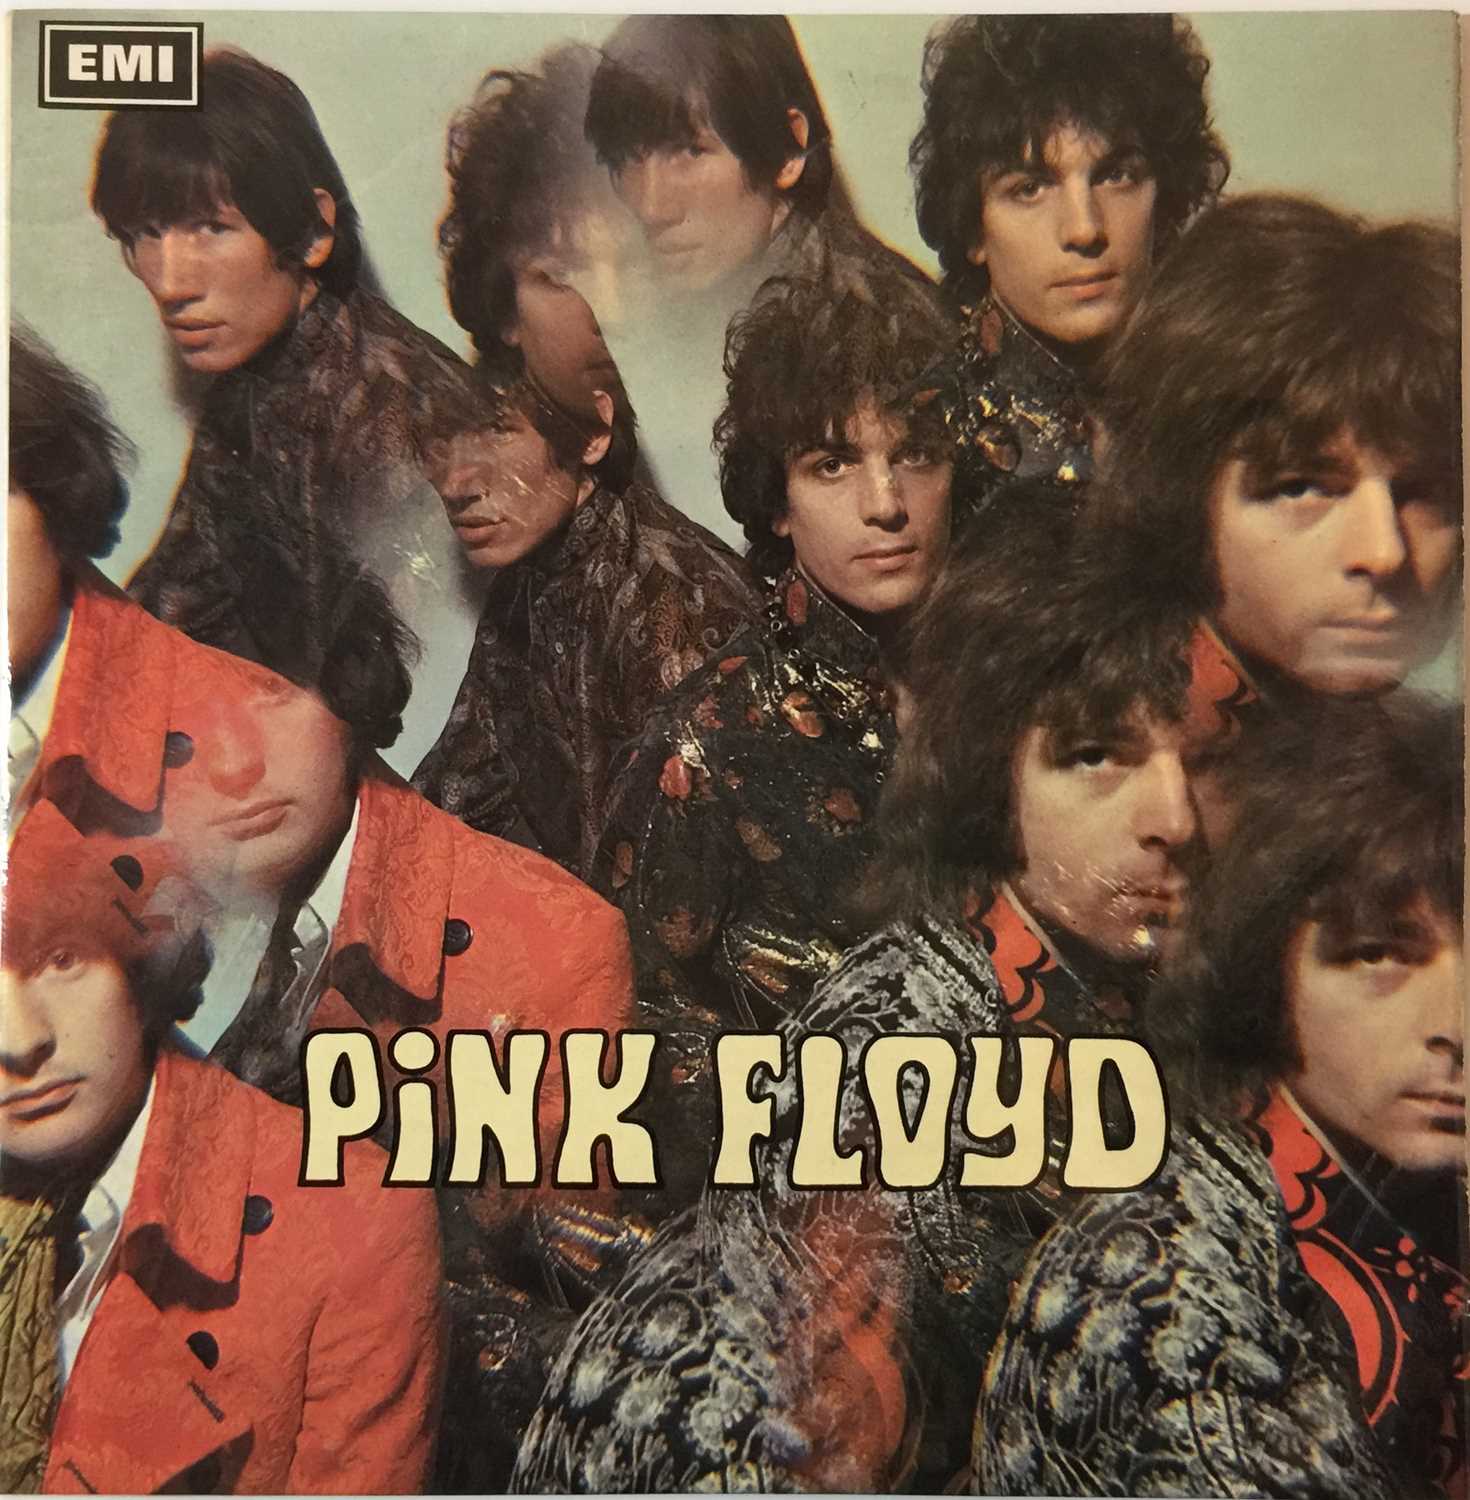 Lot 2 - PINK FLOYD - THE PIPER AT THE GATES OF DAWN LP (ORIGINAL UK STEREO PRESSING - COLUMBIA SCX 6157)